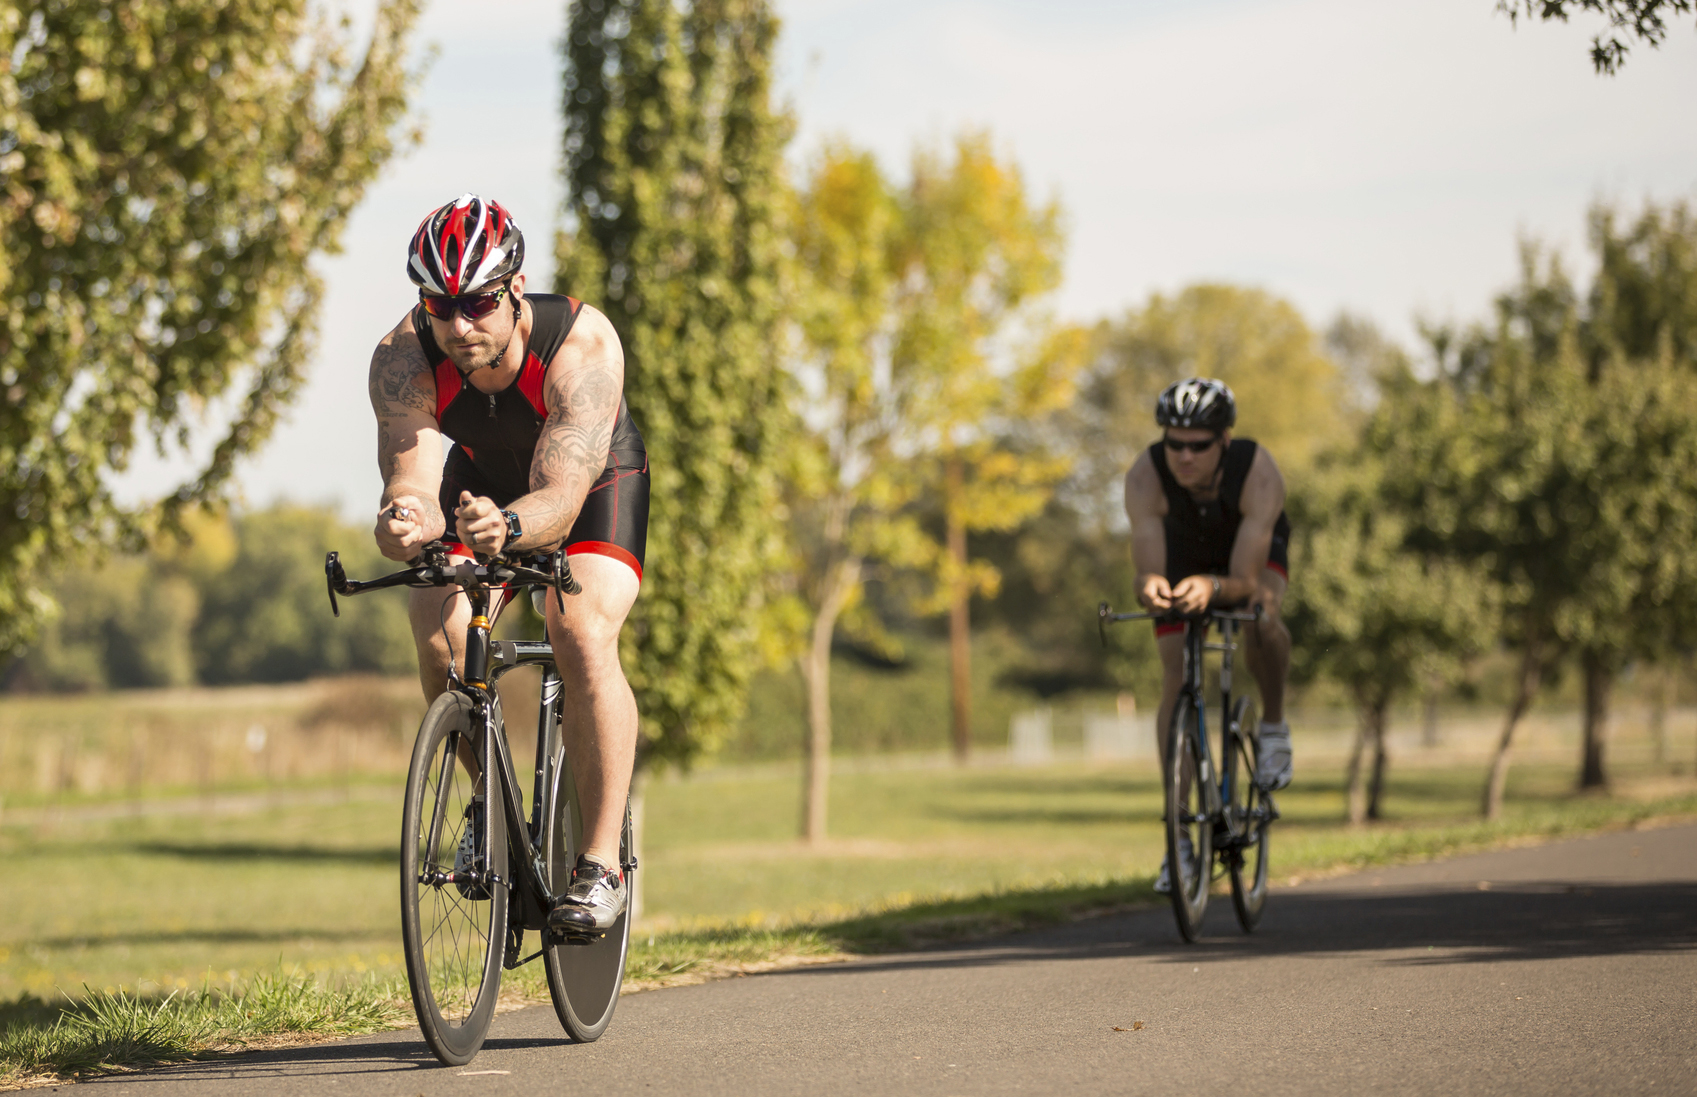 Bicycle Designs That Prevent Personal Injury